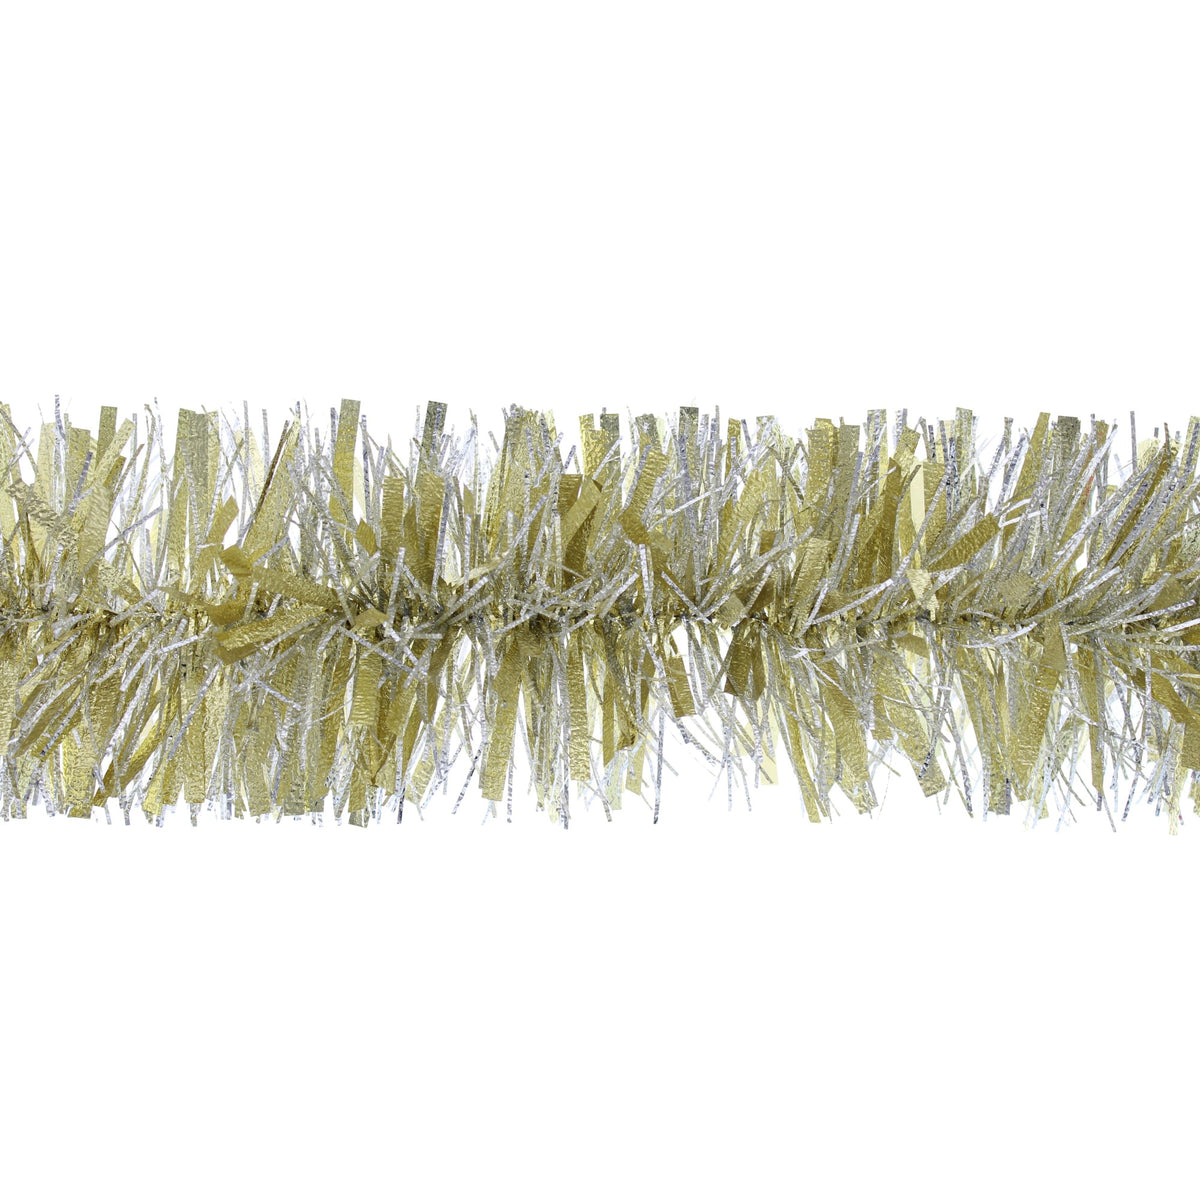 200cm x 12.5cm Gold Silver Cracked Ice Tinsel